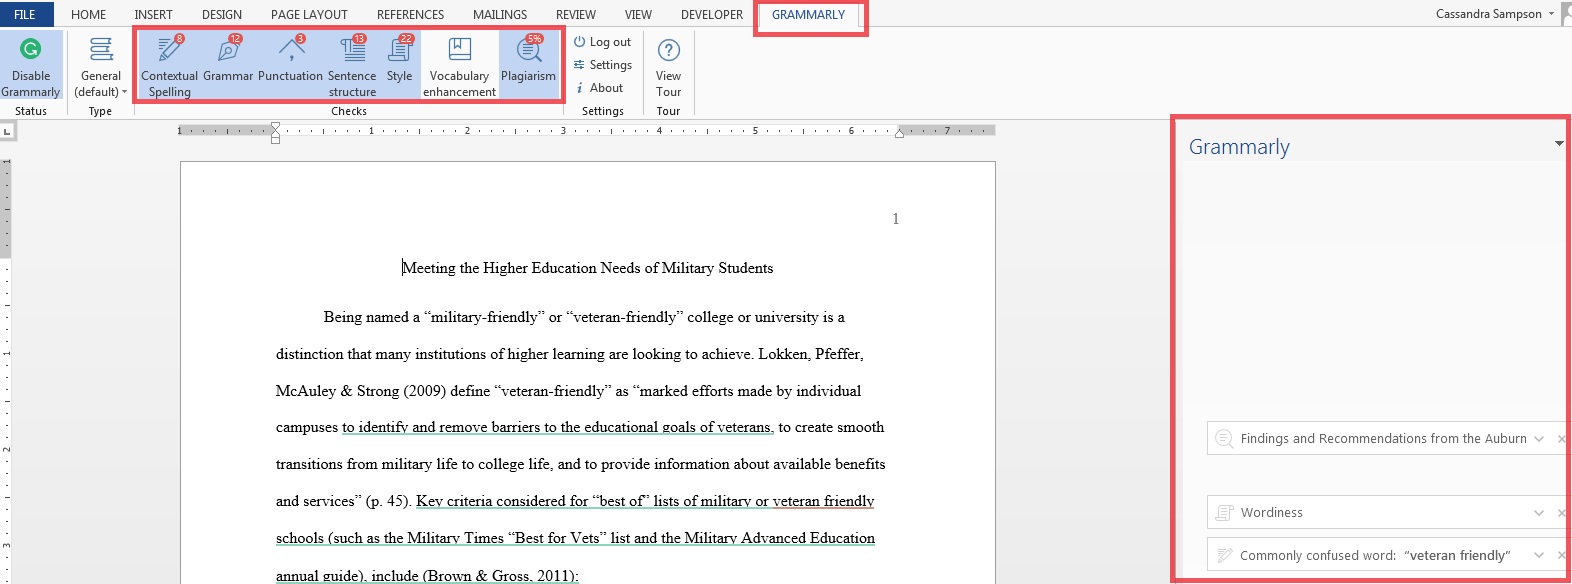 grammarly for microsoft word crack